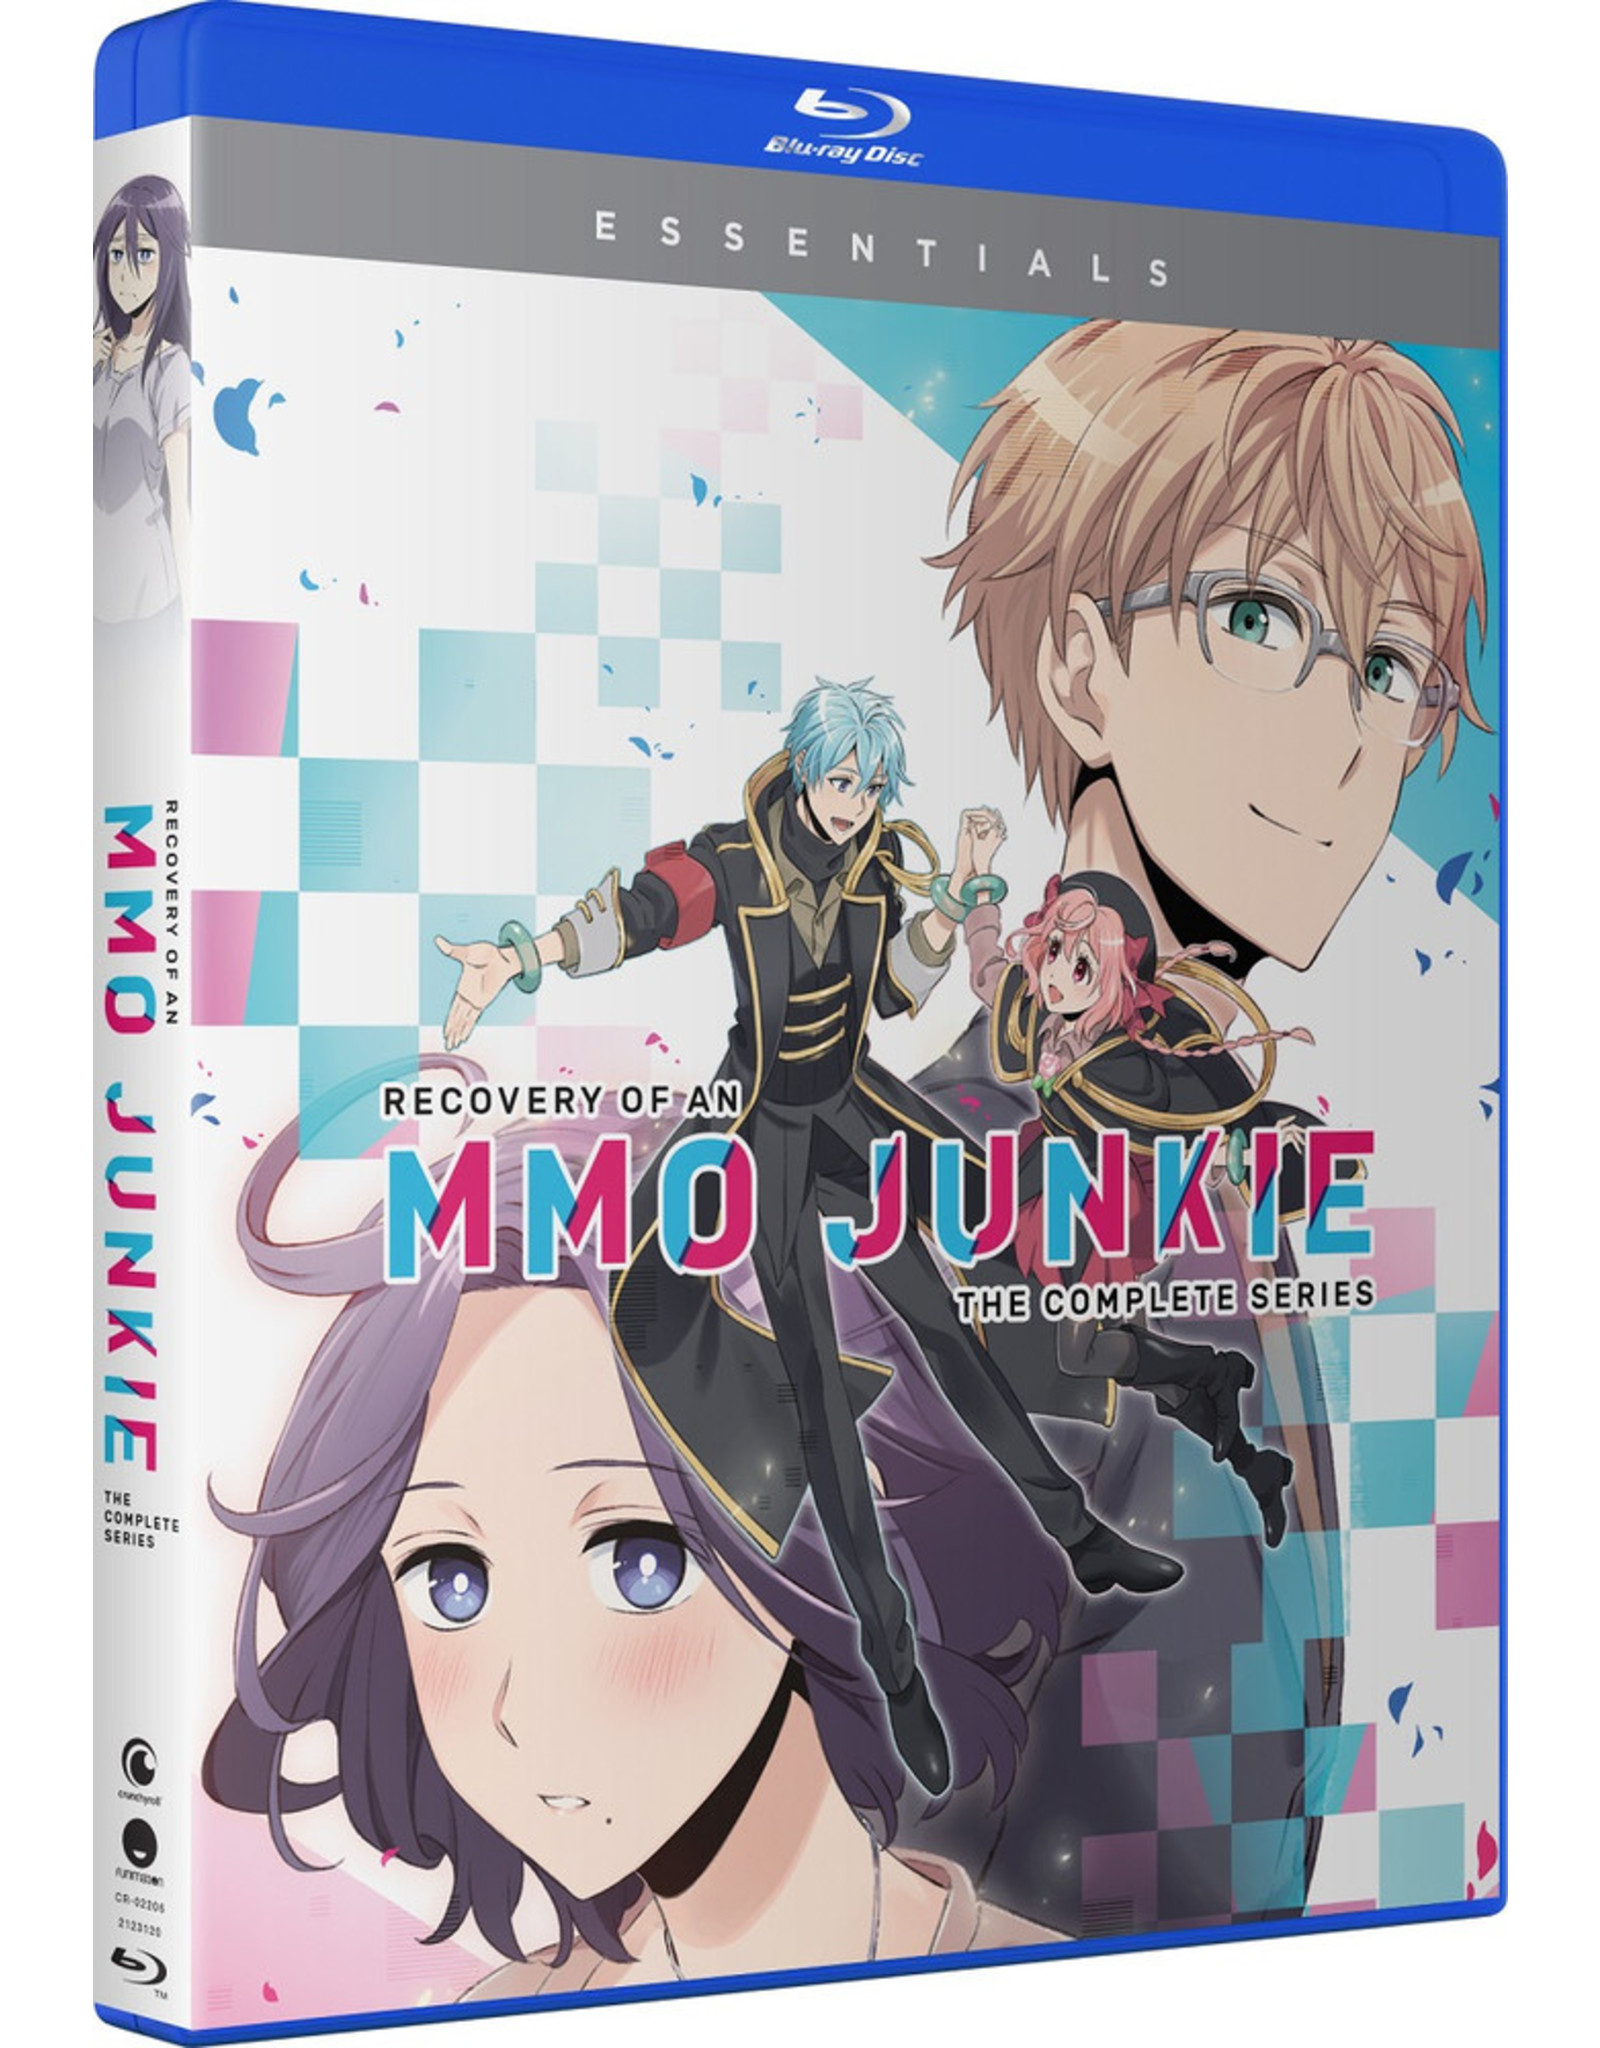 Recovery of an MMO Junky Blu-ray